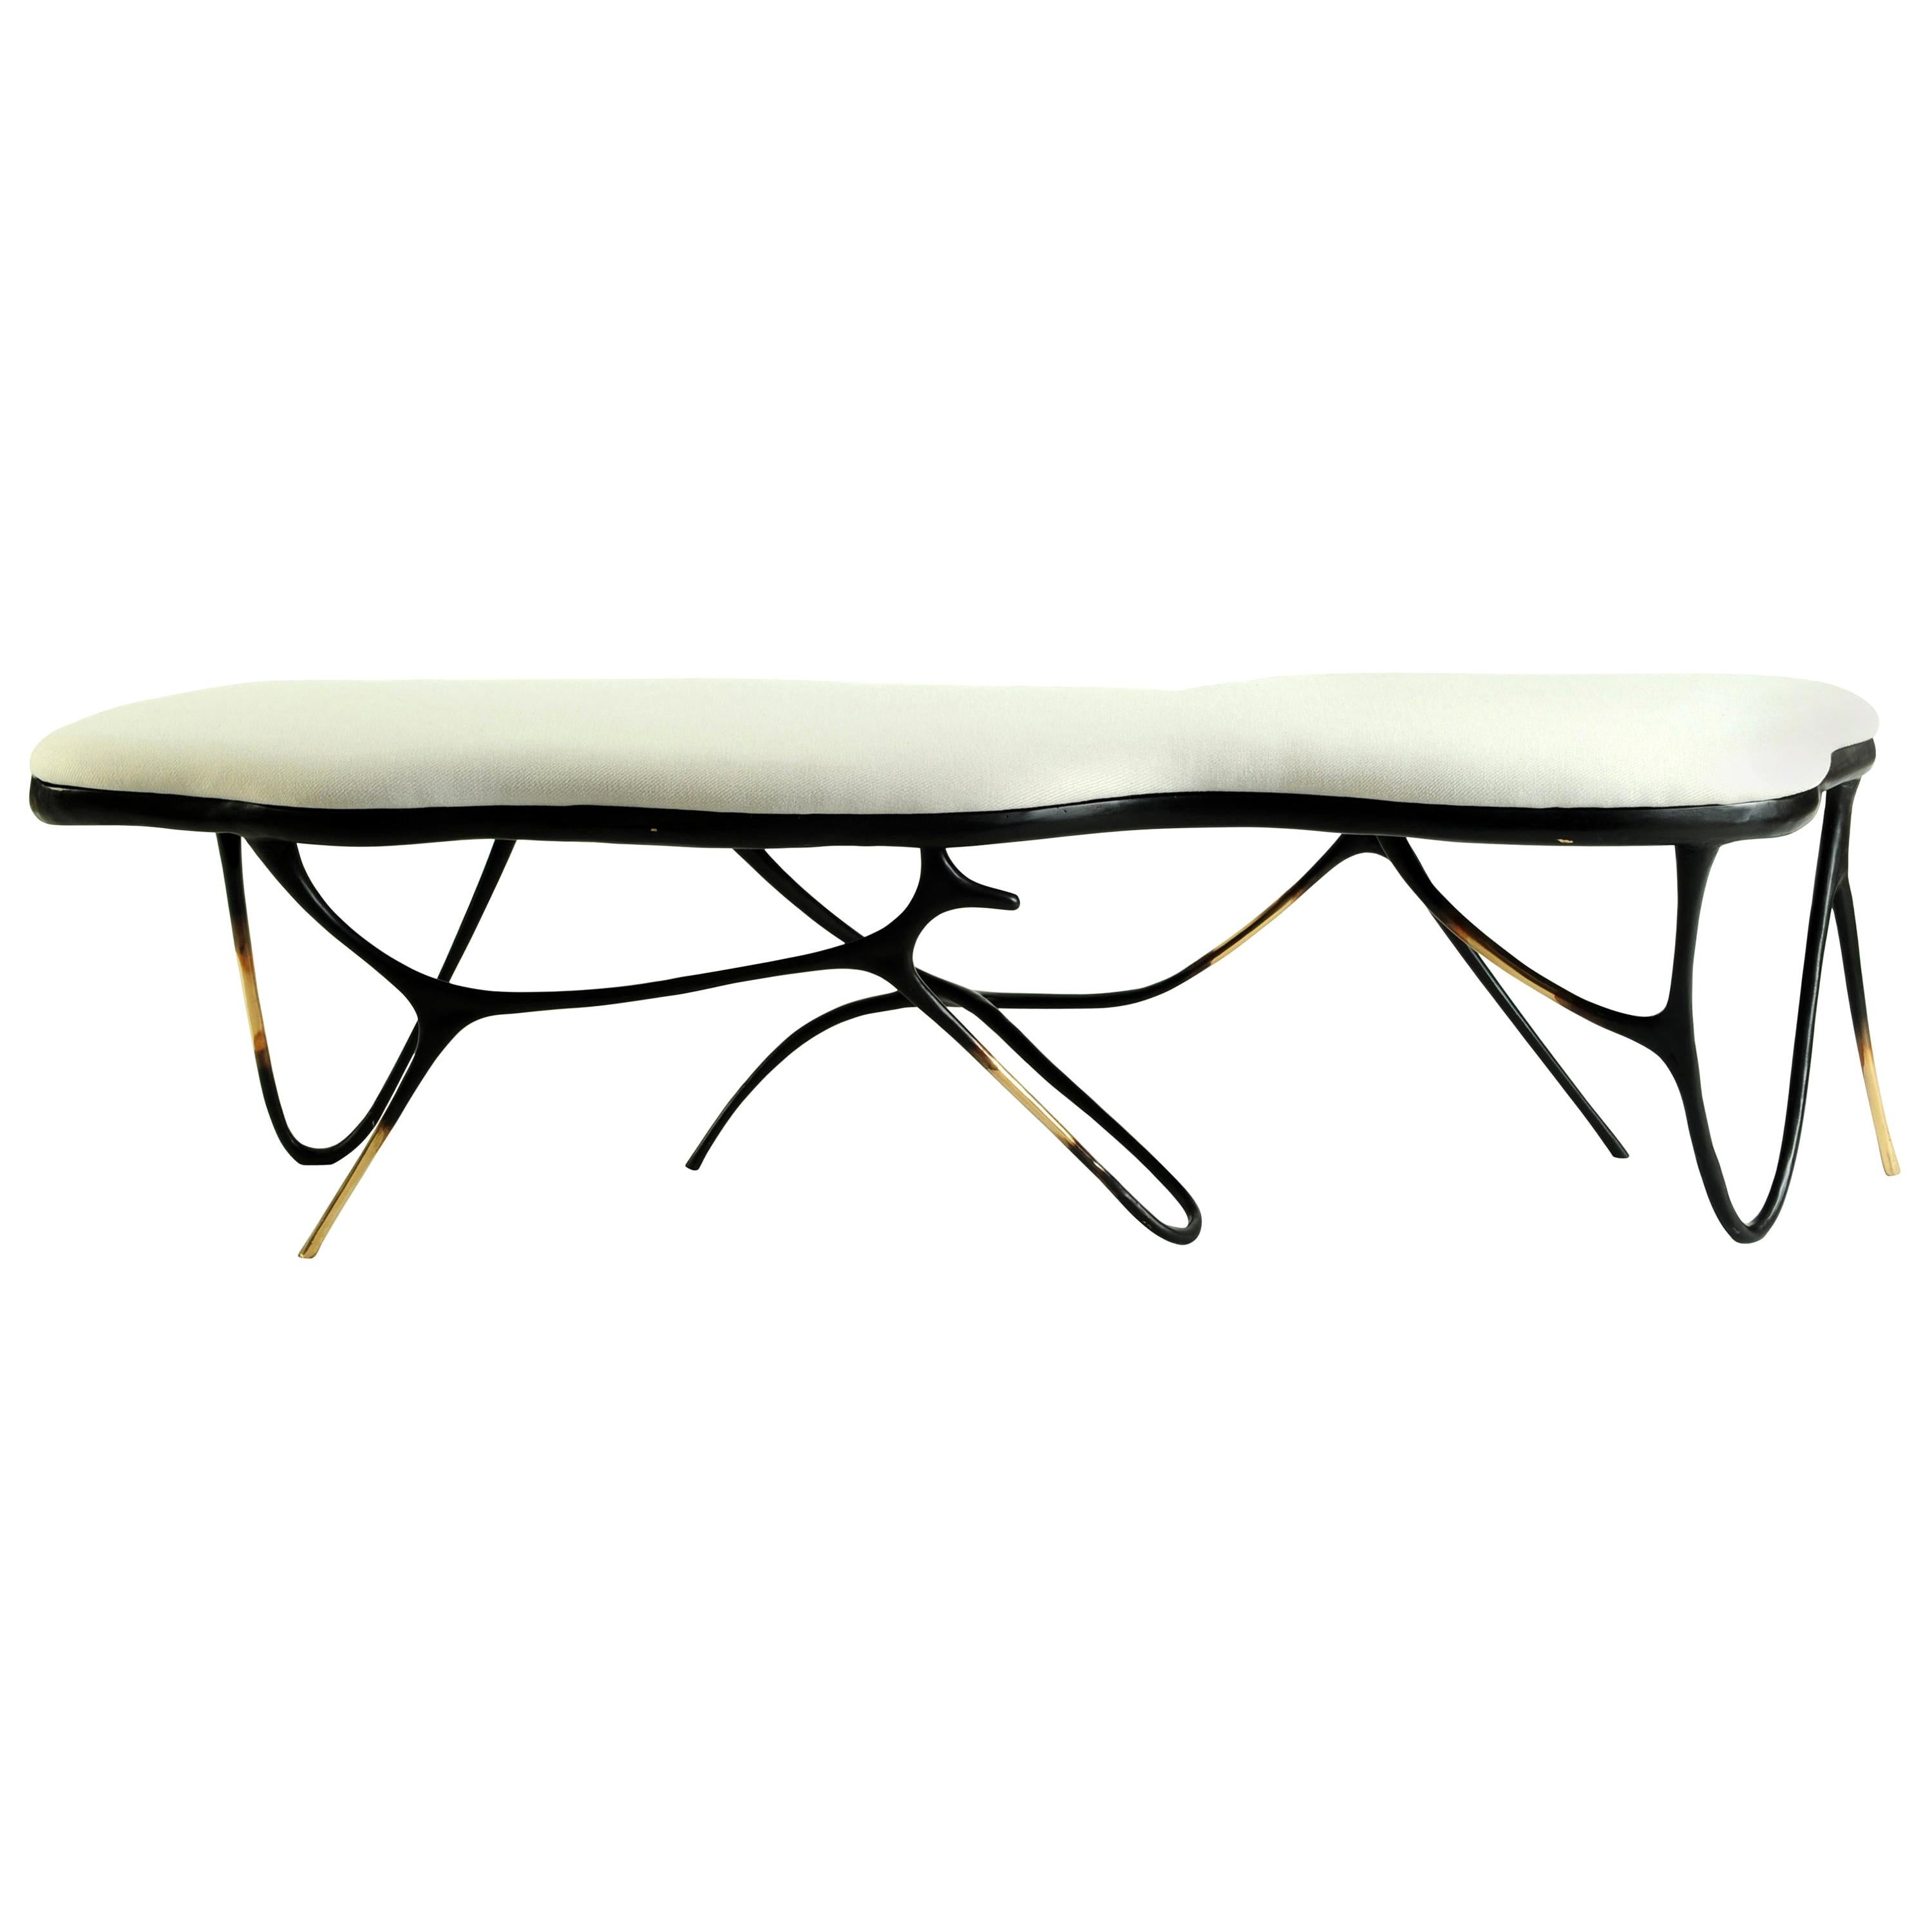 Calligraphic Sculpted Brass Bench by Misaya For Sale